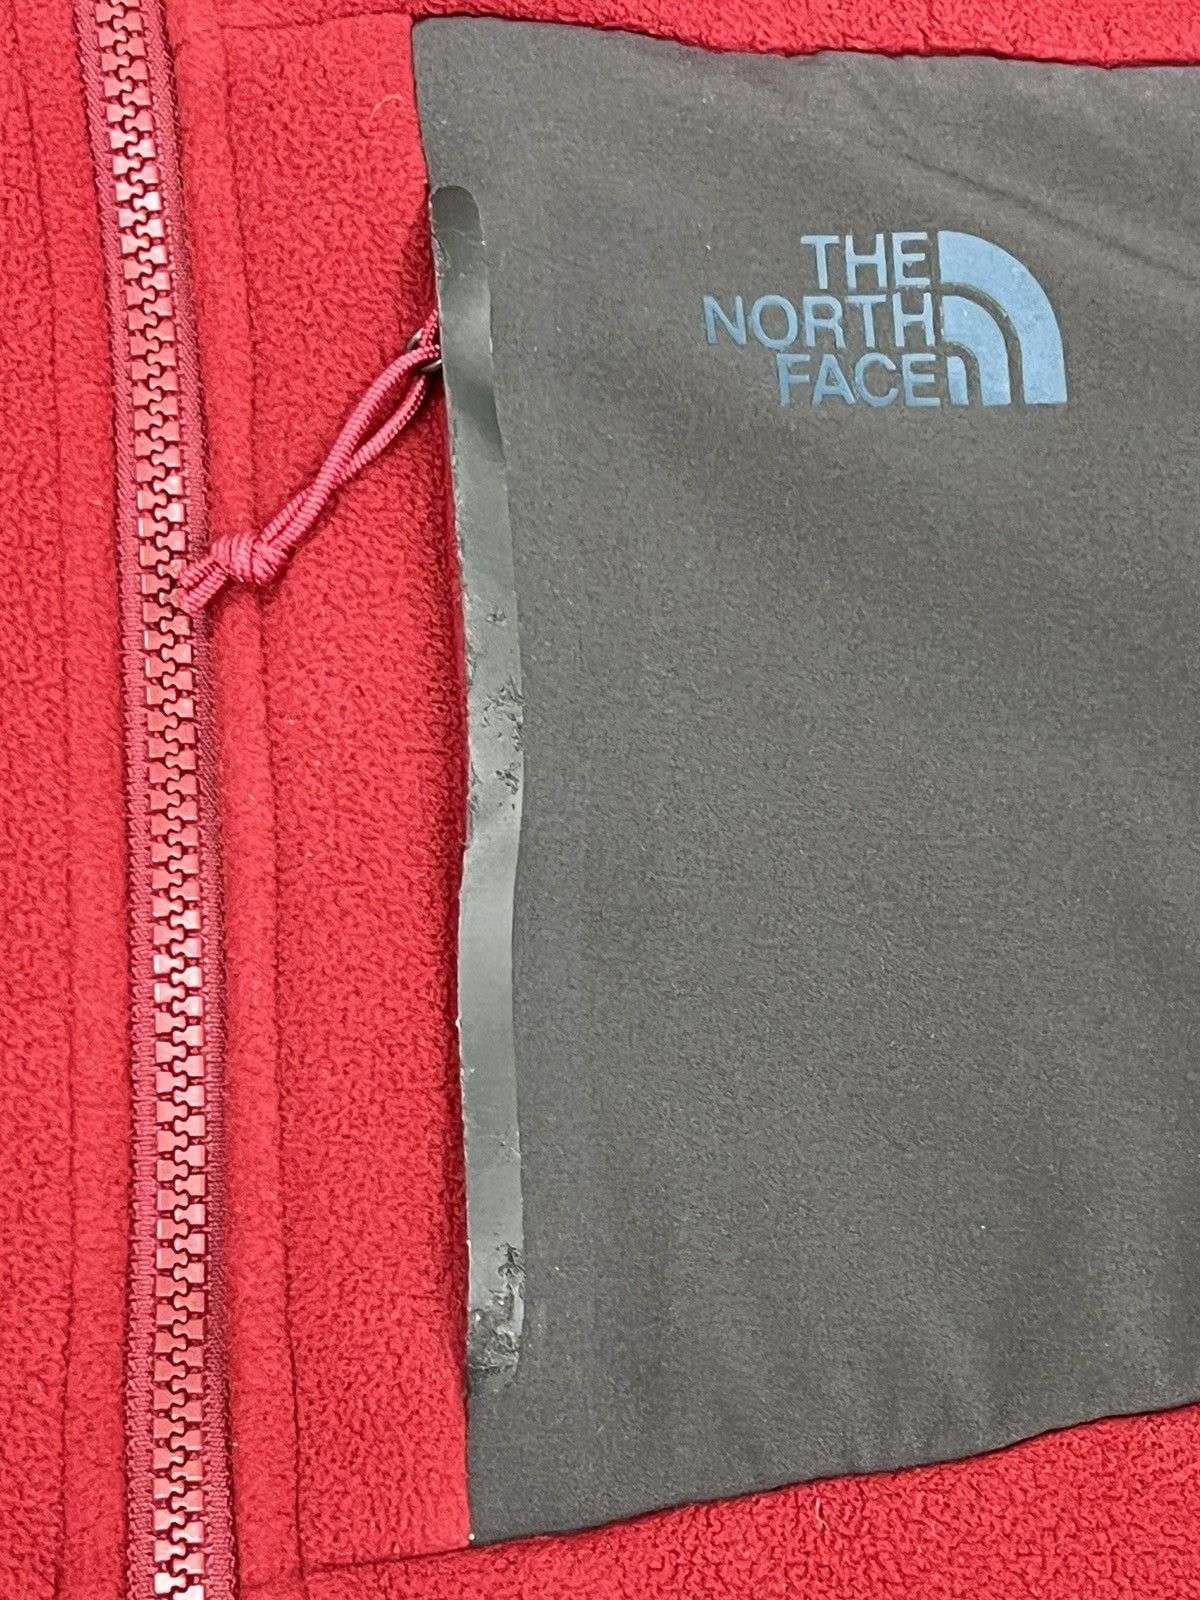 The North Face Sherpa Lined Full Zip Jacket Size US S / EU 44-46 / 1 - 2 Preview